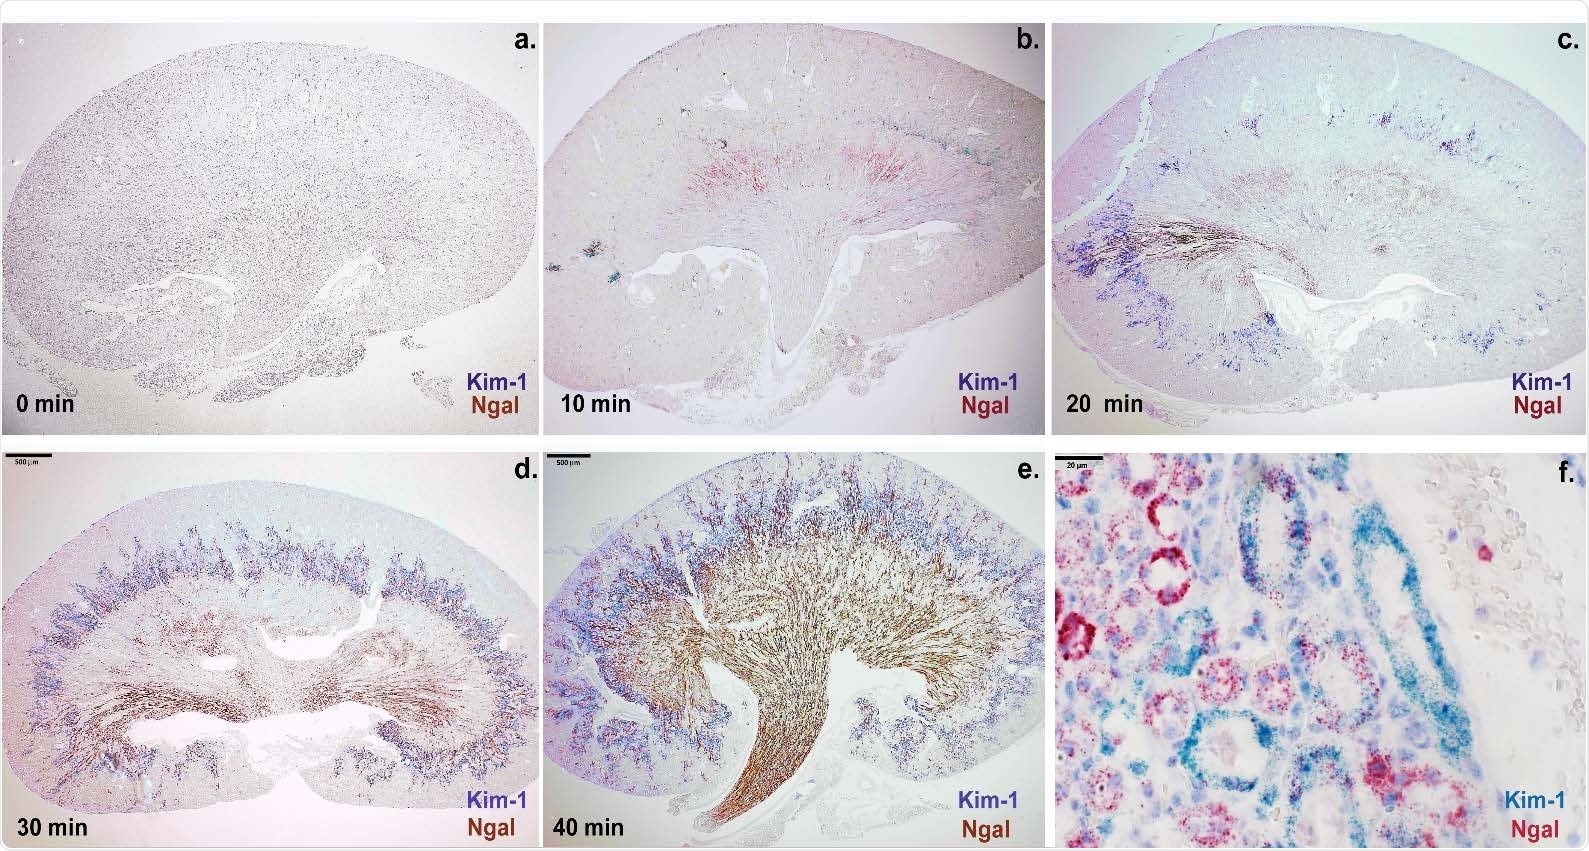 The expression level of Ngal (red-brown) and Kim-1 (blue-purple) depended on the dose of arterial ischemia in mouse: (a-e) Ngal expression was found at the cortico-medullary junction after 10min of ischemia, but throughout the medulla and papilla after 30-40min of ischemia. Kim-1 expression was found in the cortex and throughout the cortico-medullary junction. (e-f) Prolonged ischemia (40min) broadened the expression domain of Ngal to include the proximal tubule marked by Kim-1. In contrast to Ngal, Kim-1 expression remained localized to the cortex and cortico-medullary junction. Bars a-e: 500μm; Bars f: 20μm.